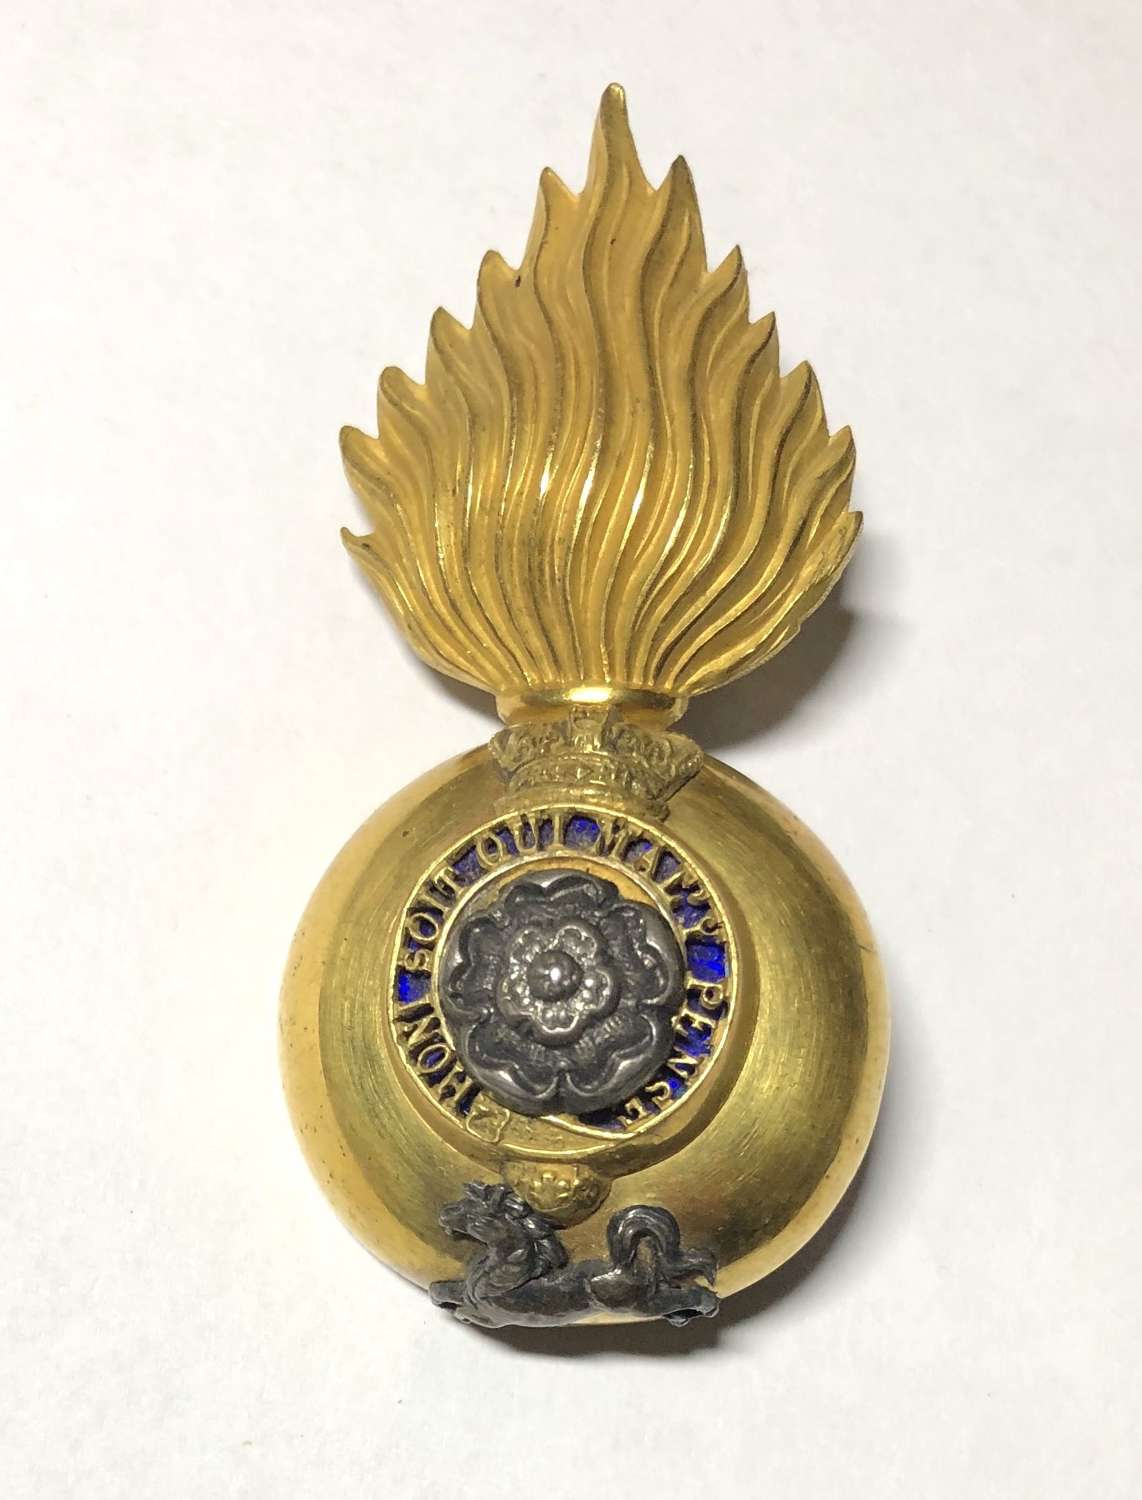 Royal Fusiliers Victorian Officers glengarry badge c1881-96